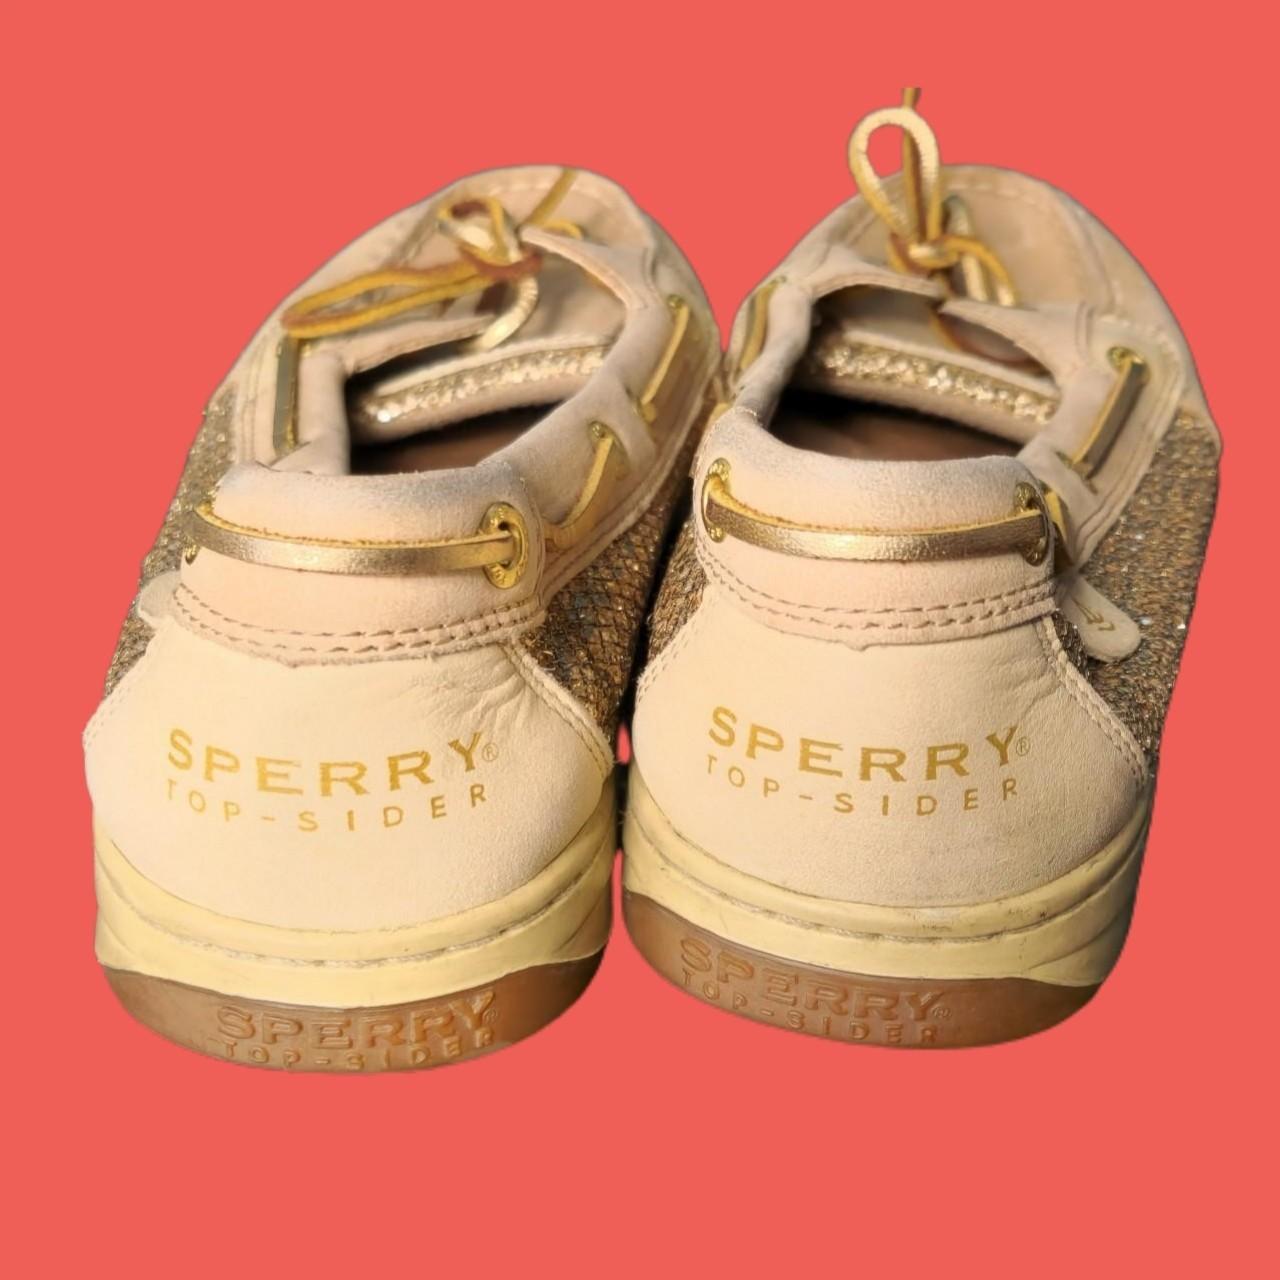 SPERRY ANGELFISH GOLD GLITTER BOAT SHOES A lower... - Depop